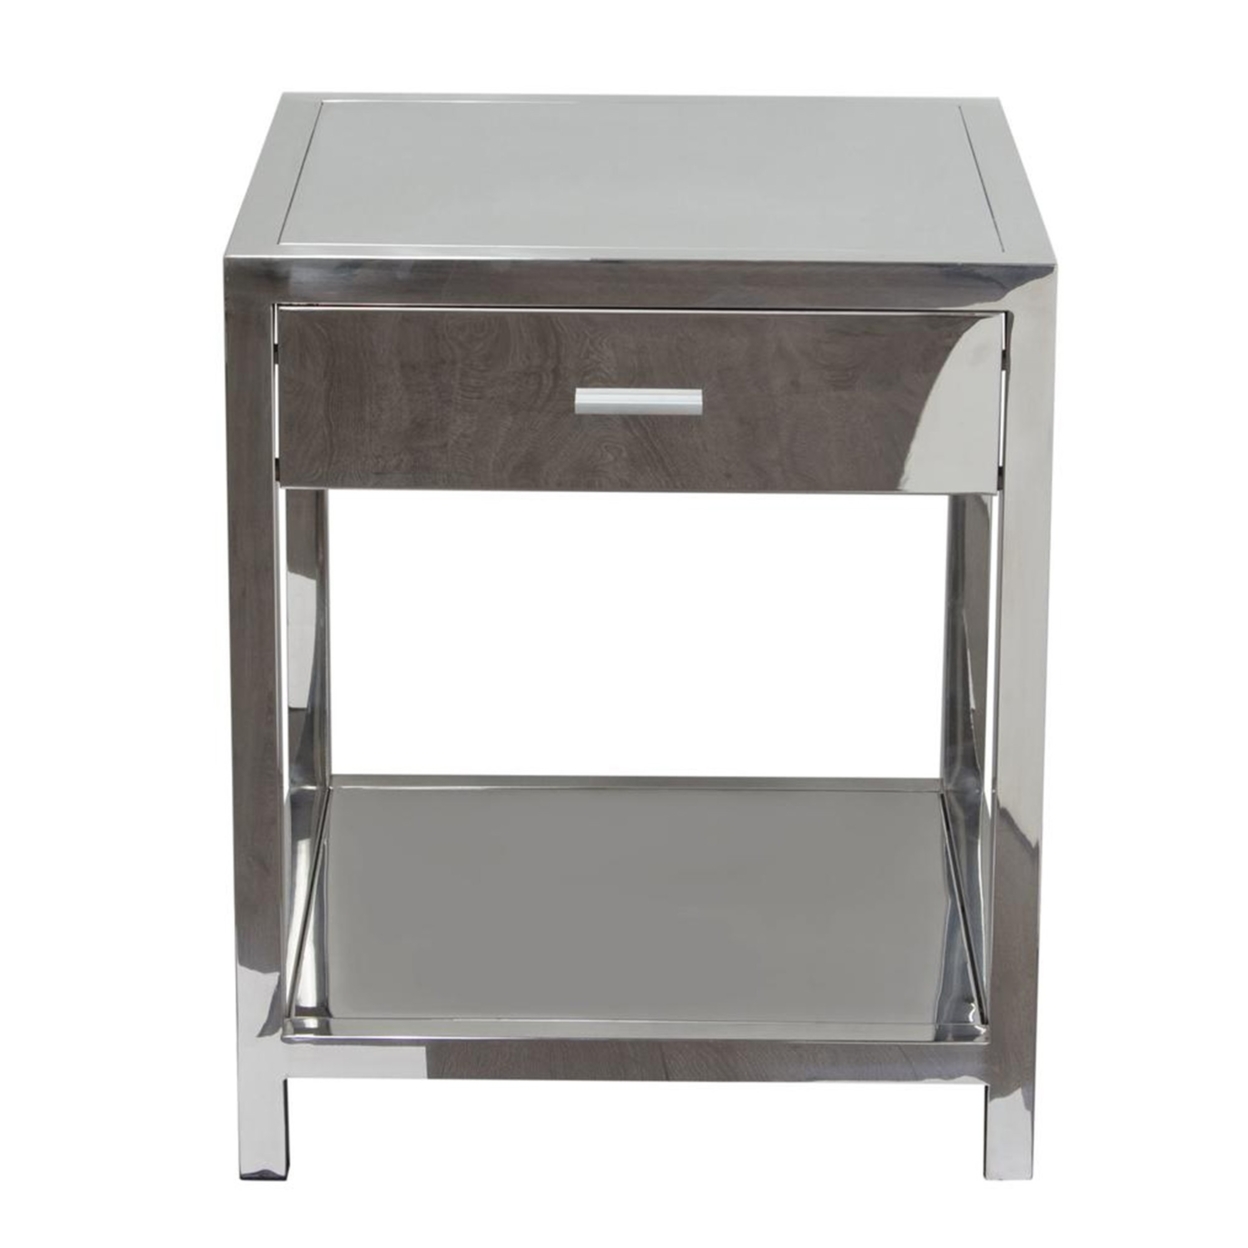 Square Stainless Steel Accent Table With One Drawer And Open Bottom Shelf, Silver- Saltoro Sherpi